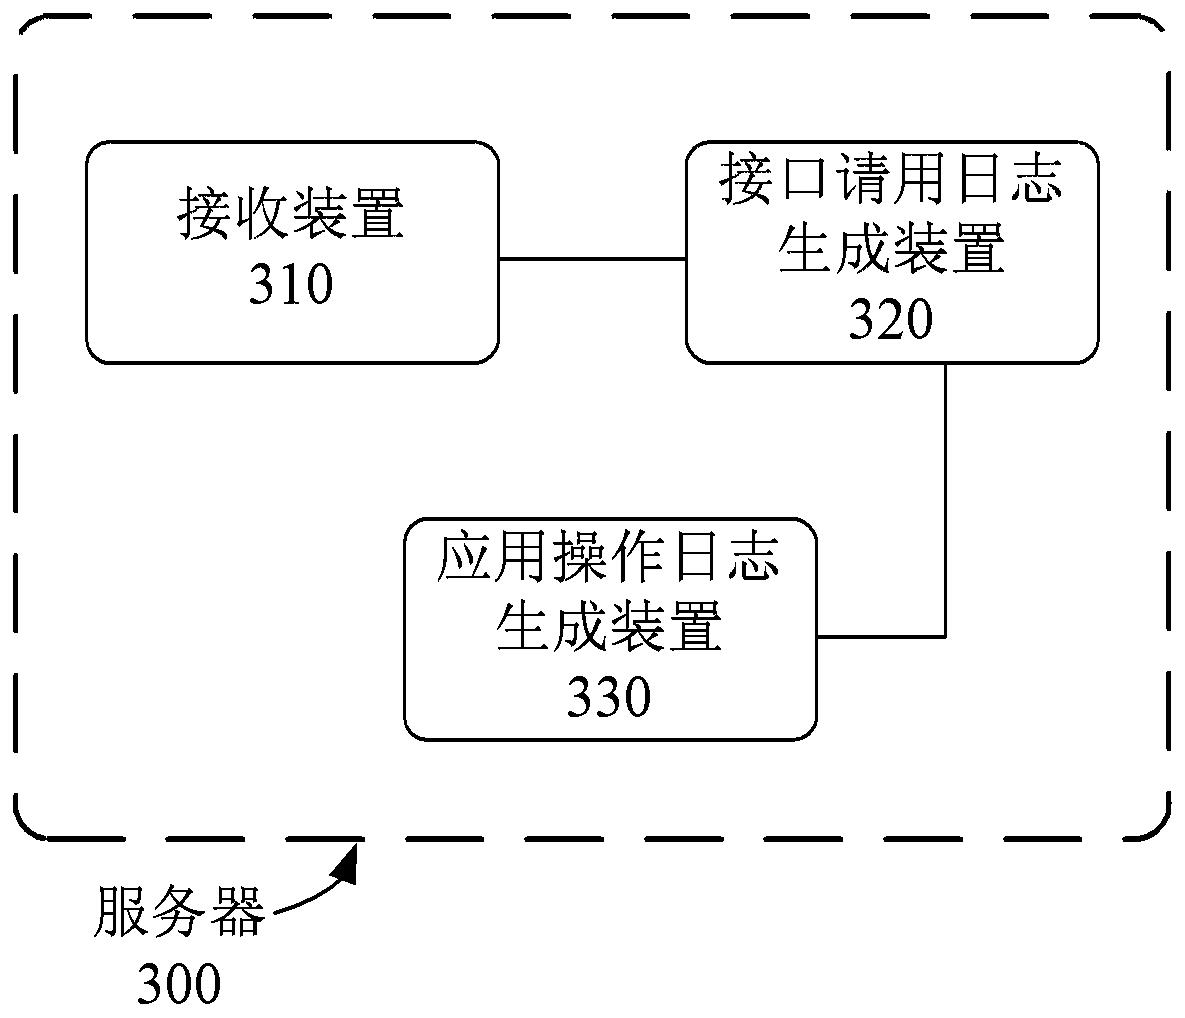 Method and device for generating mobile terminal application operation logs